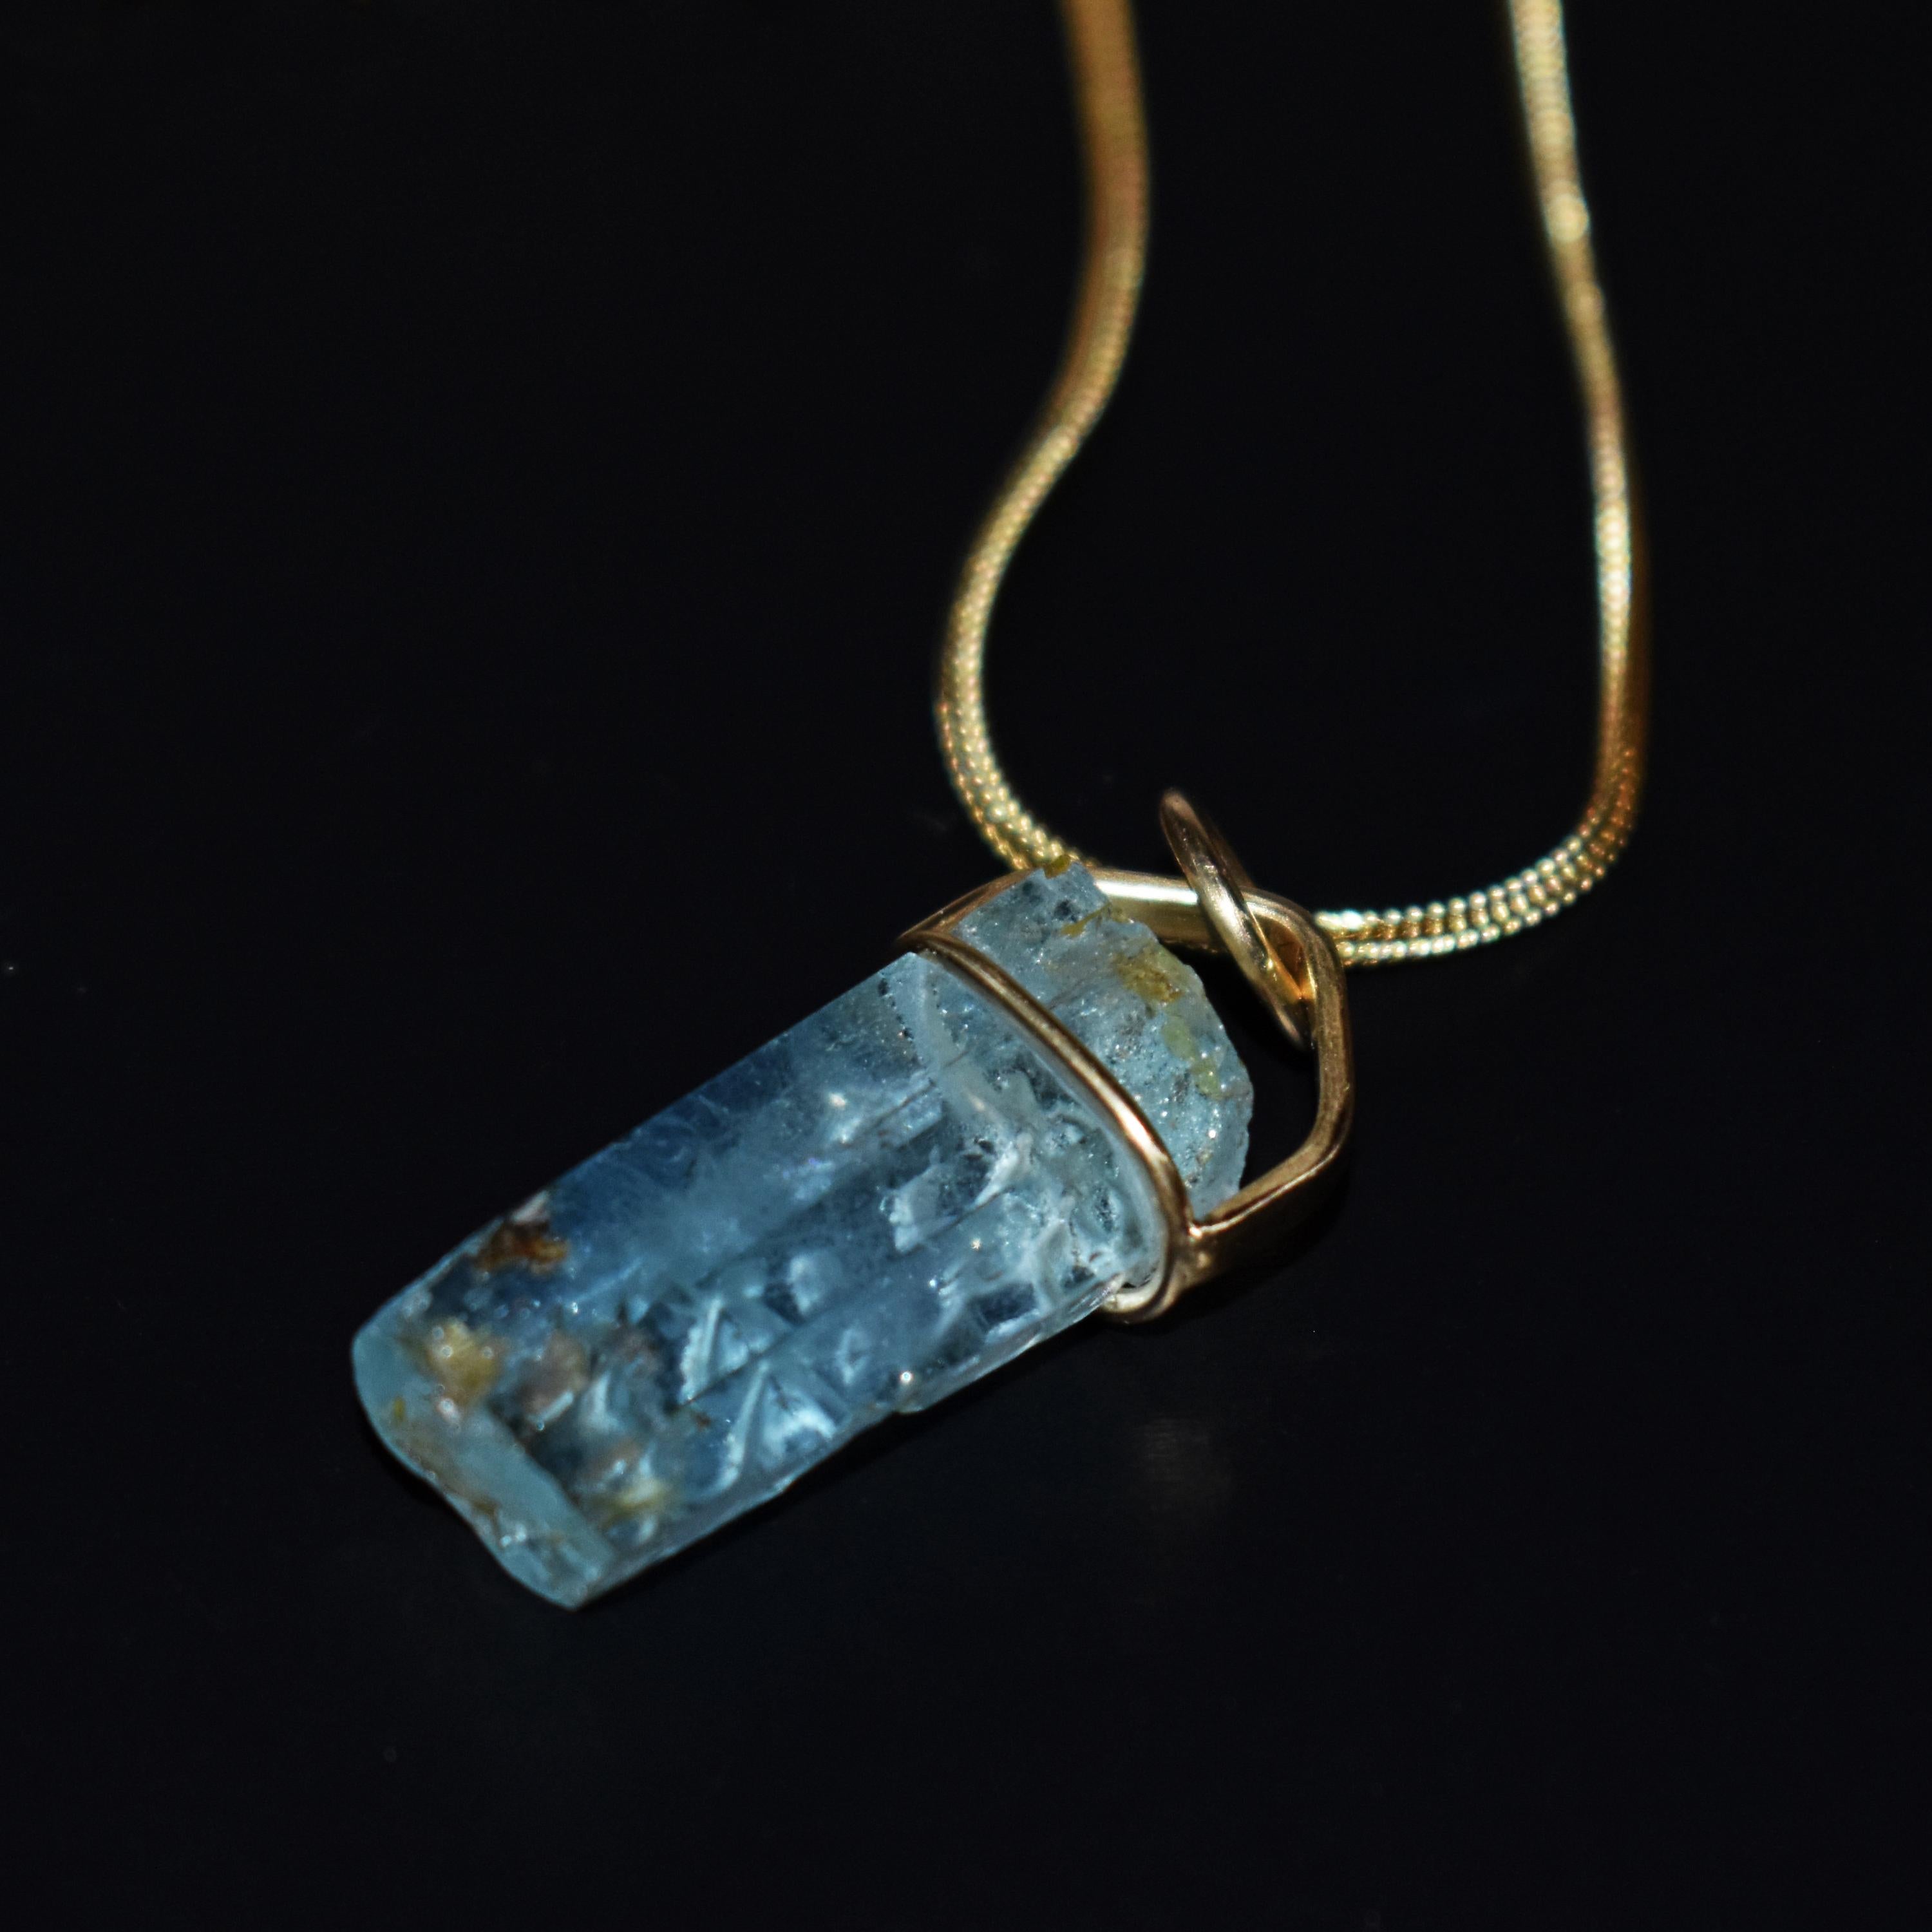 Beautiful hand-carved, rough Aquamarine crystal and 18k yellow gold pendant on a 16 inch 18k gold foxtail chain necklace. Aquamarine pendant, including bail, is 1.44 inches or 37mm in length. Gorgeous, carved vine design in this sky blue Aquamarine